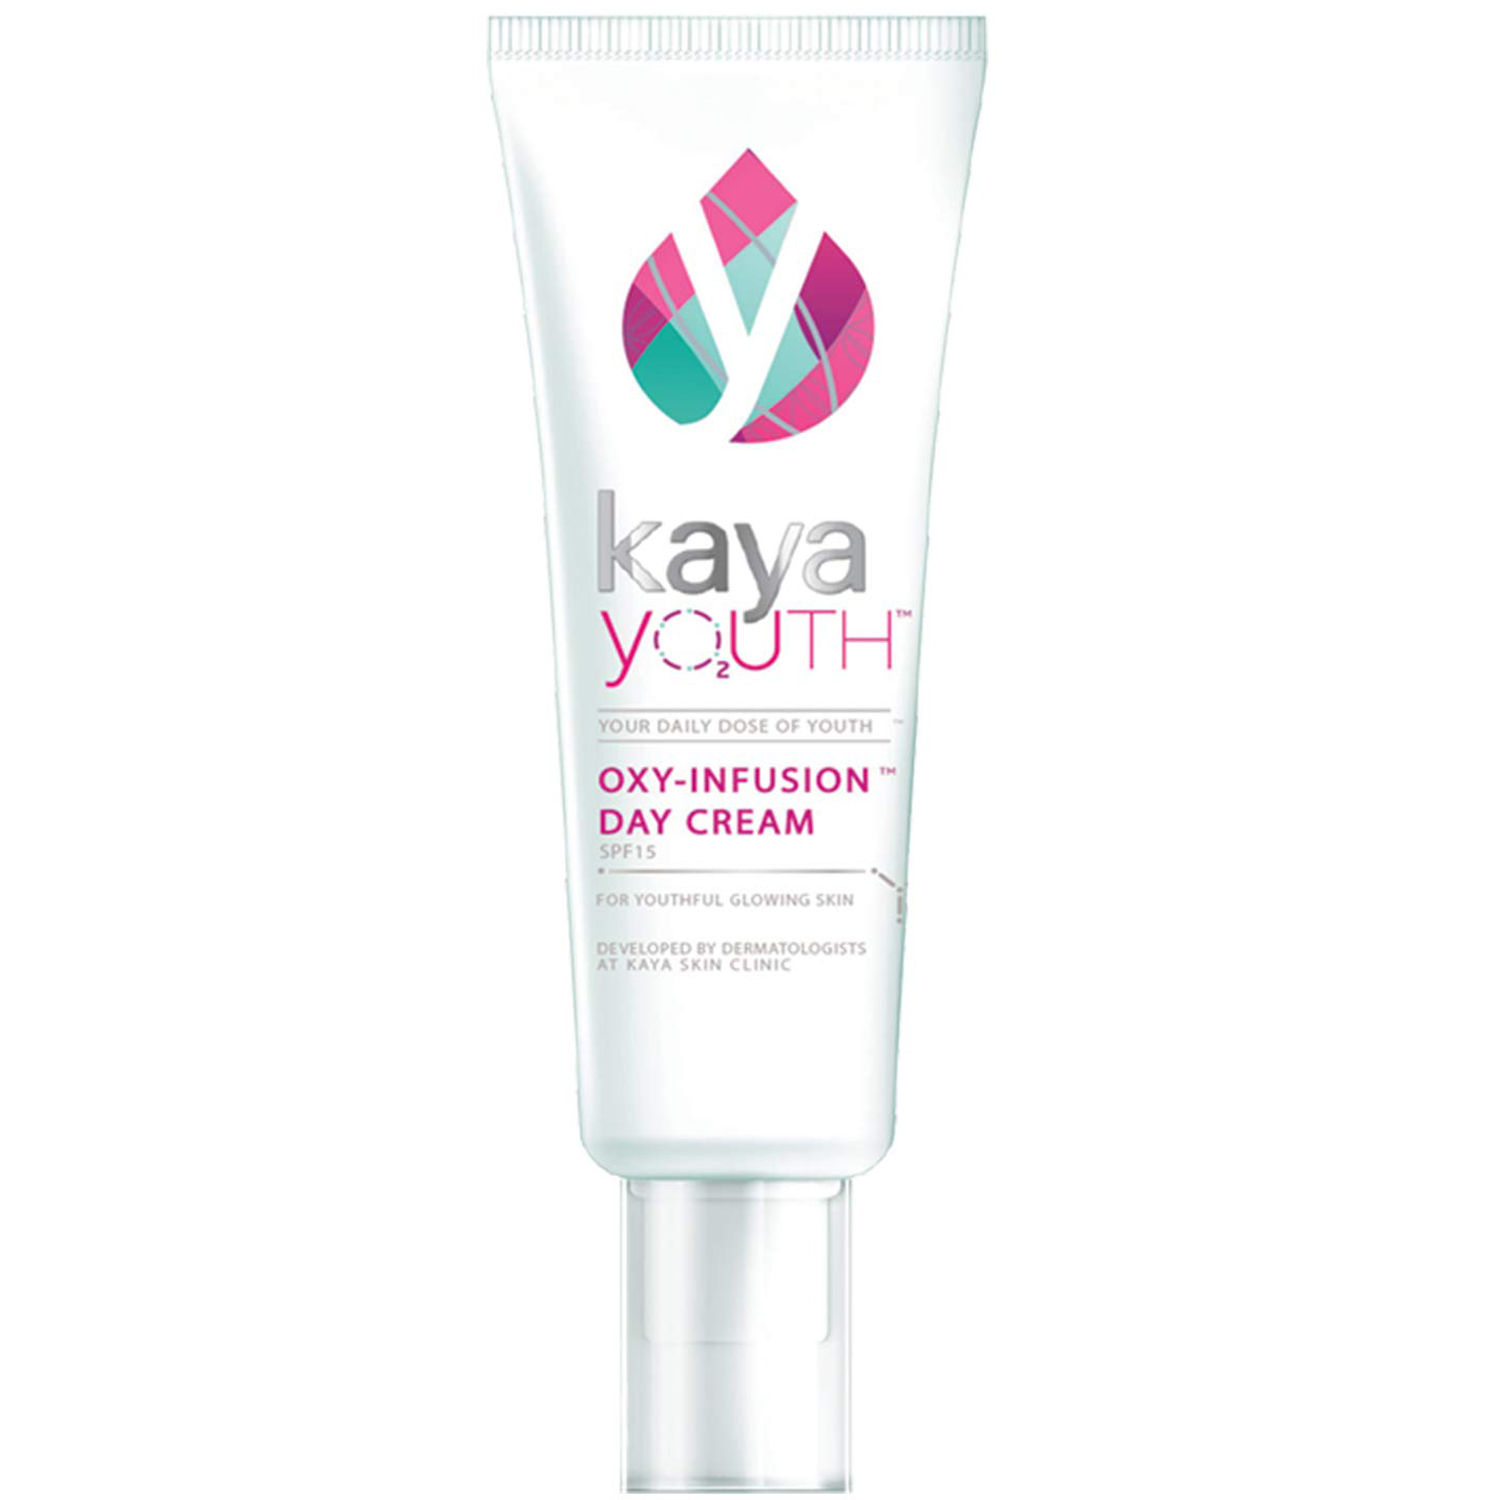 Buy Kaya Youth Oxy-Infusion Day Cream SPF 15, 20 gm Online